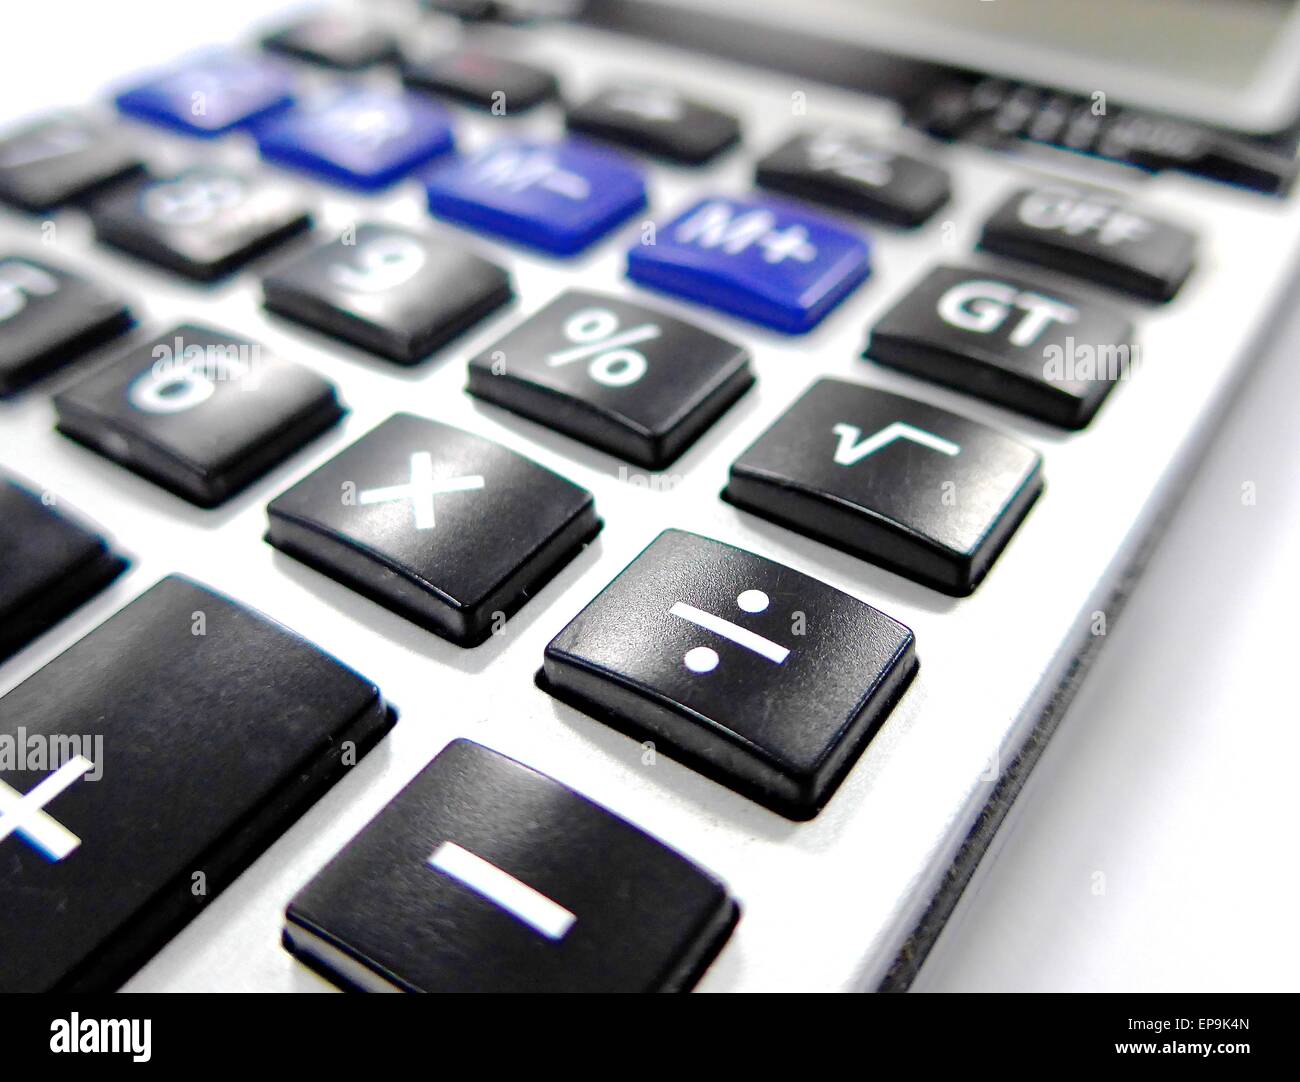 The close view of calculator on the table Stock Photo